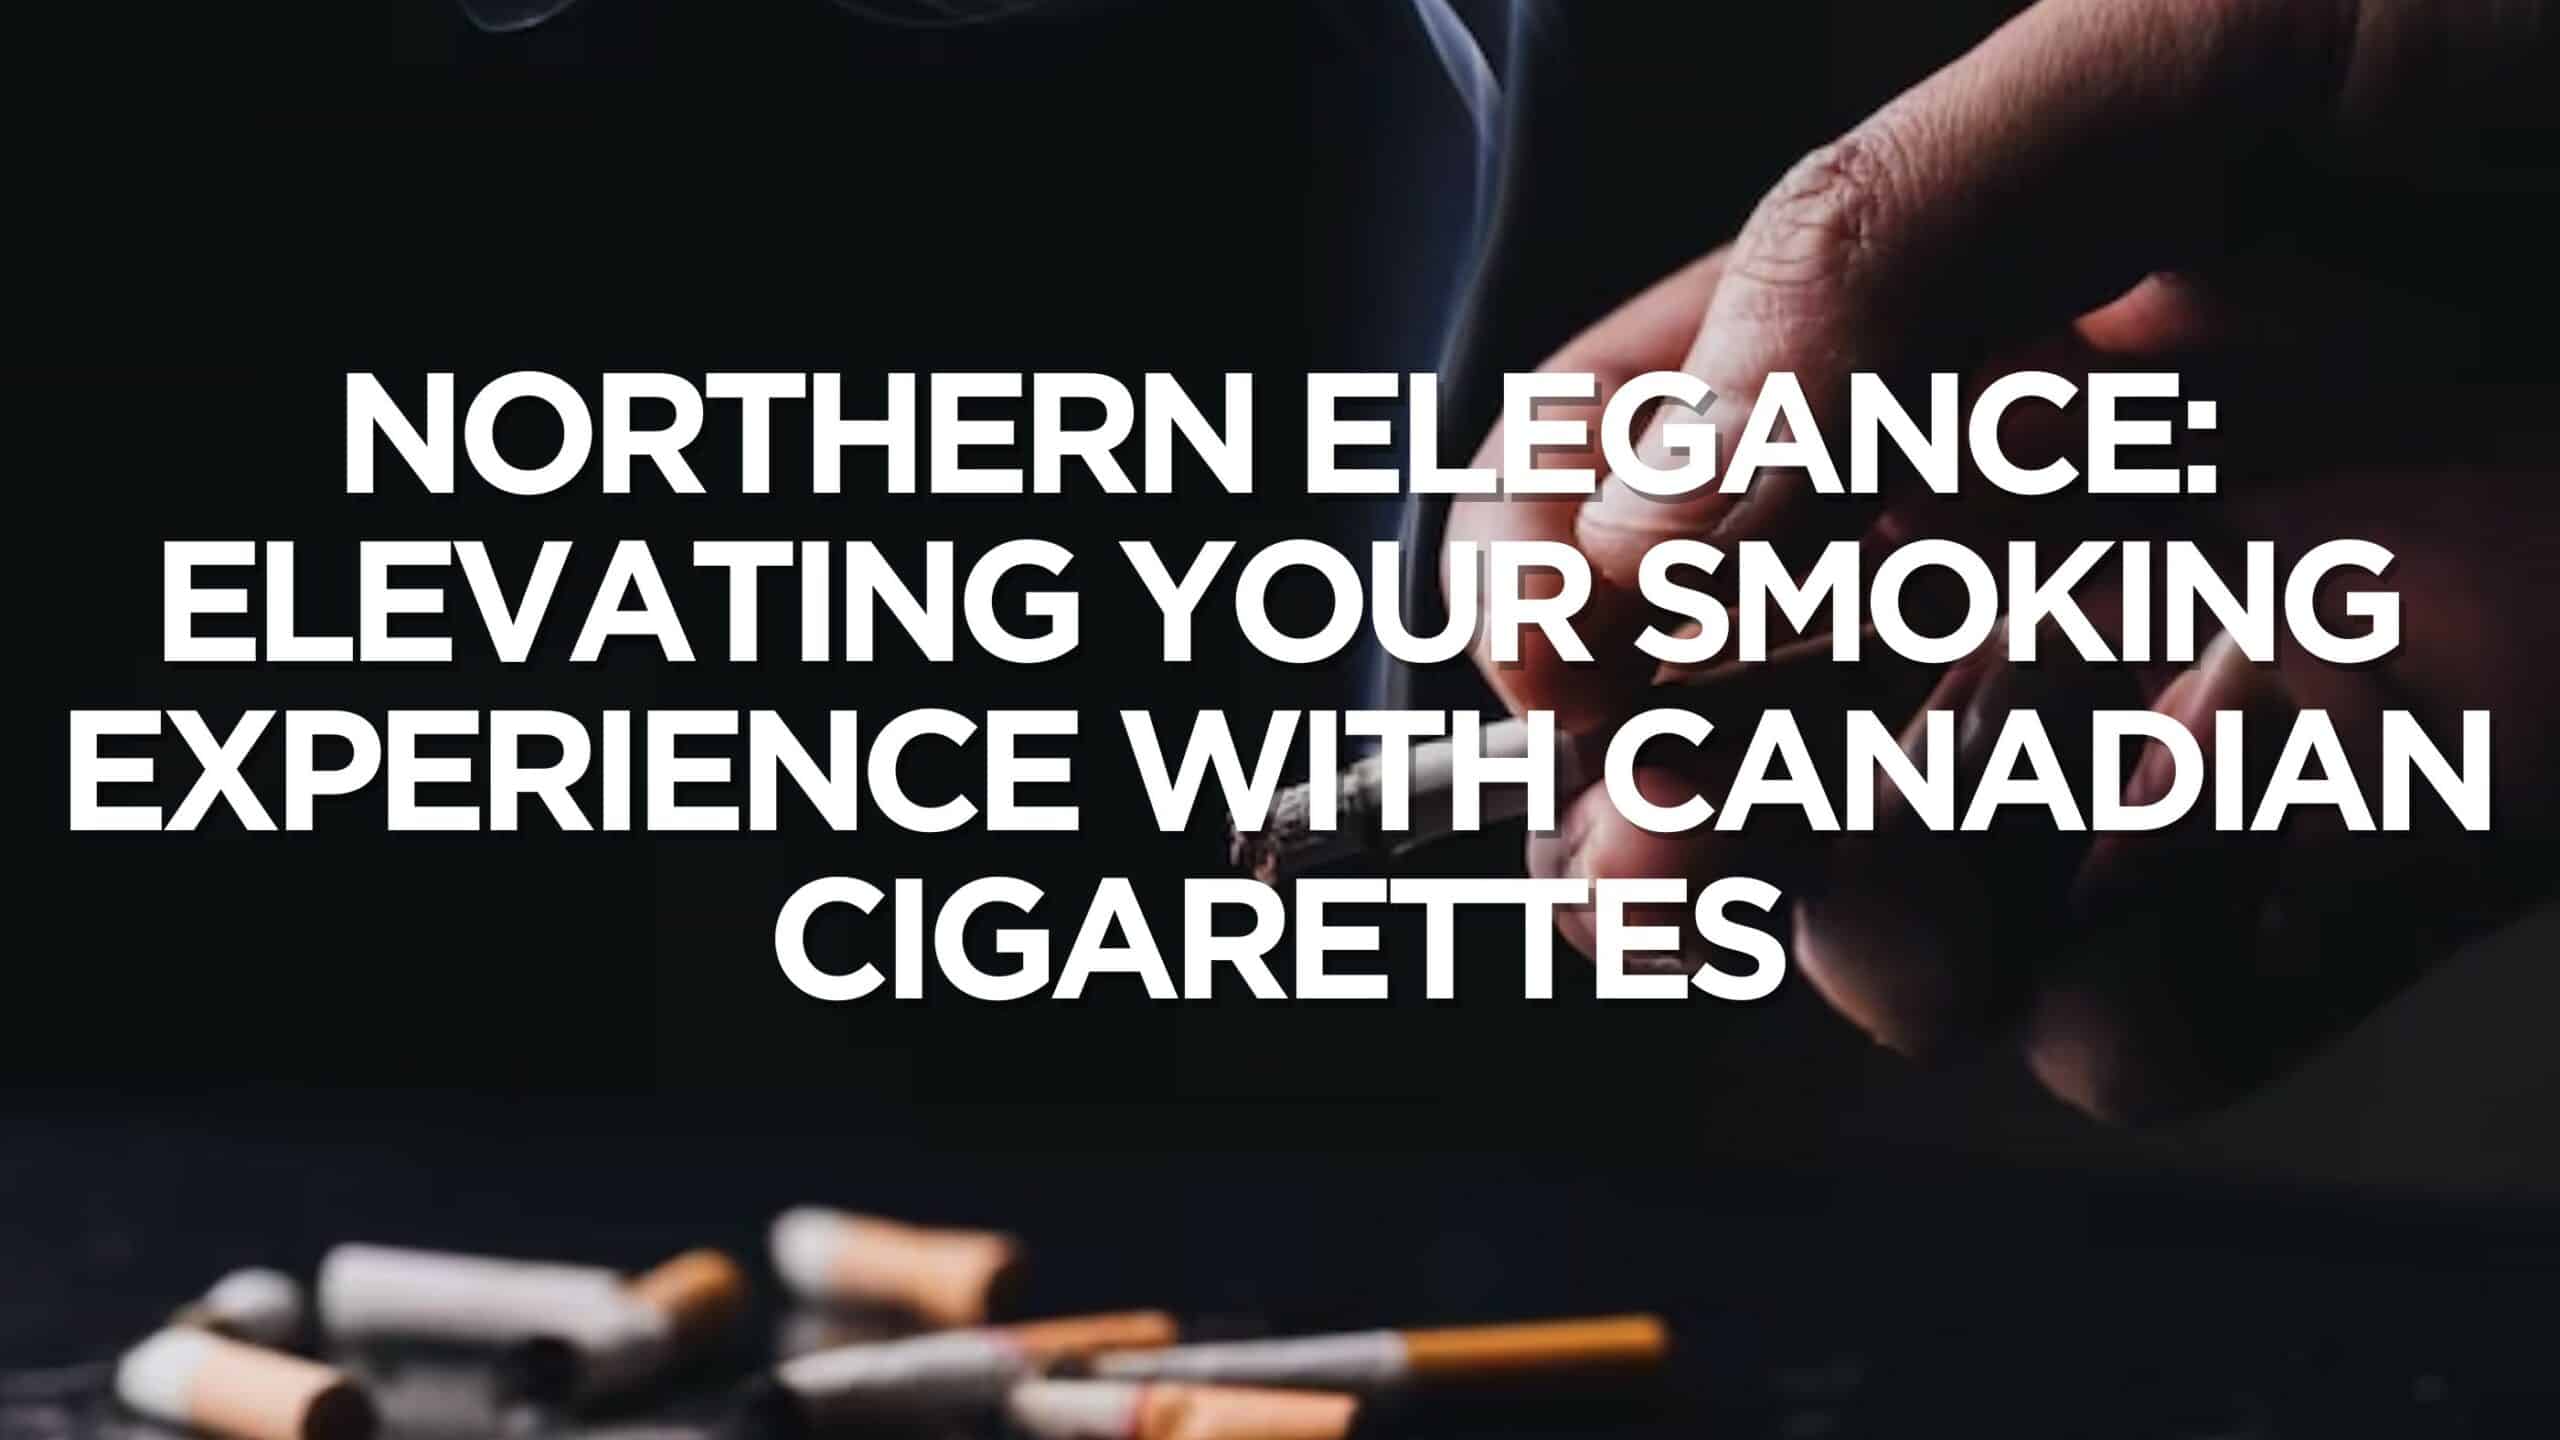 Northern Elegance: Elevating Your Smoking Experience with Canadian Cigarettes